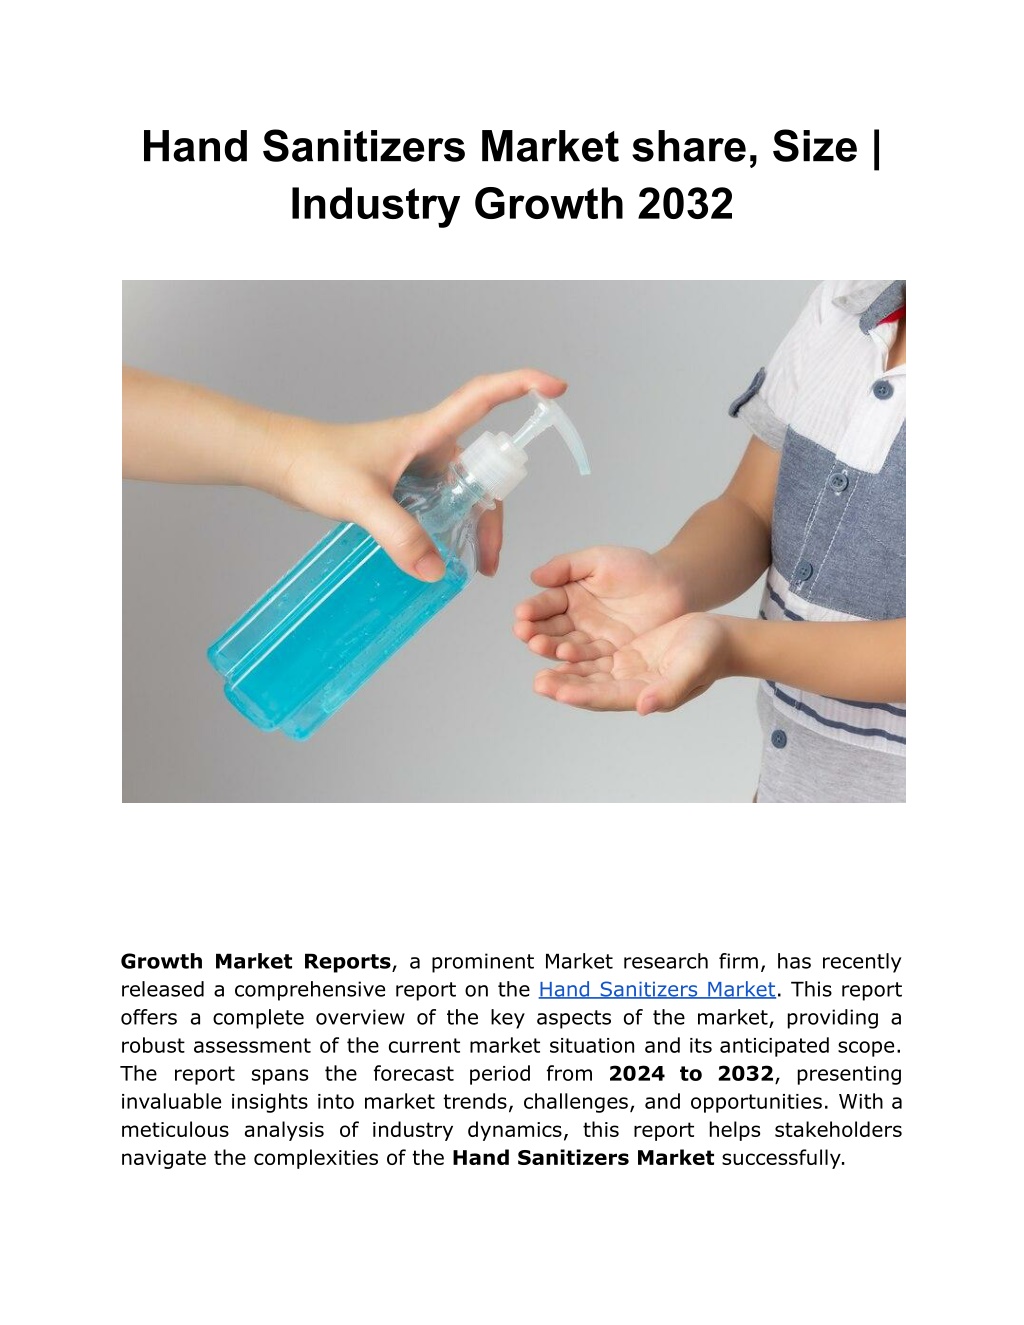 hand sanitizers market share size industry growth l.w